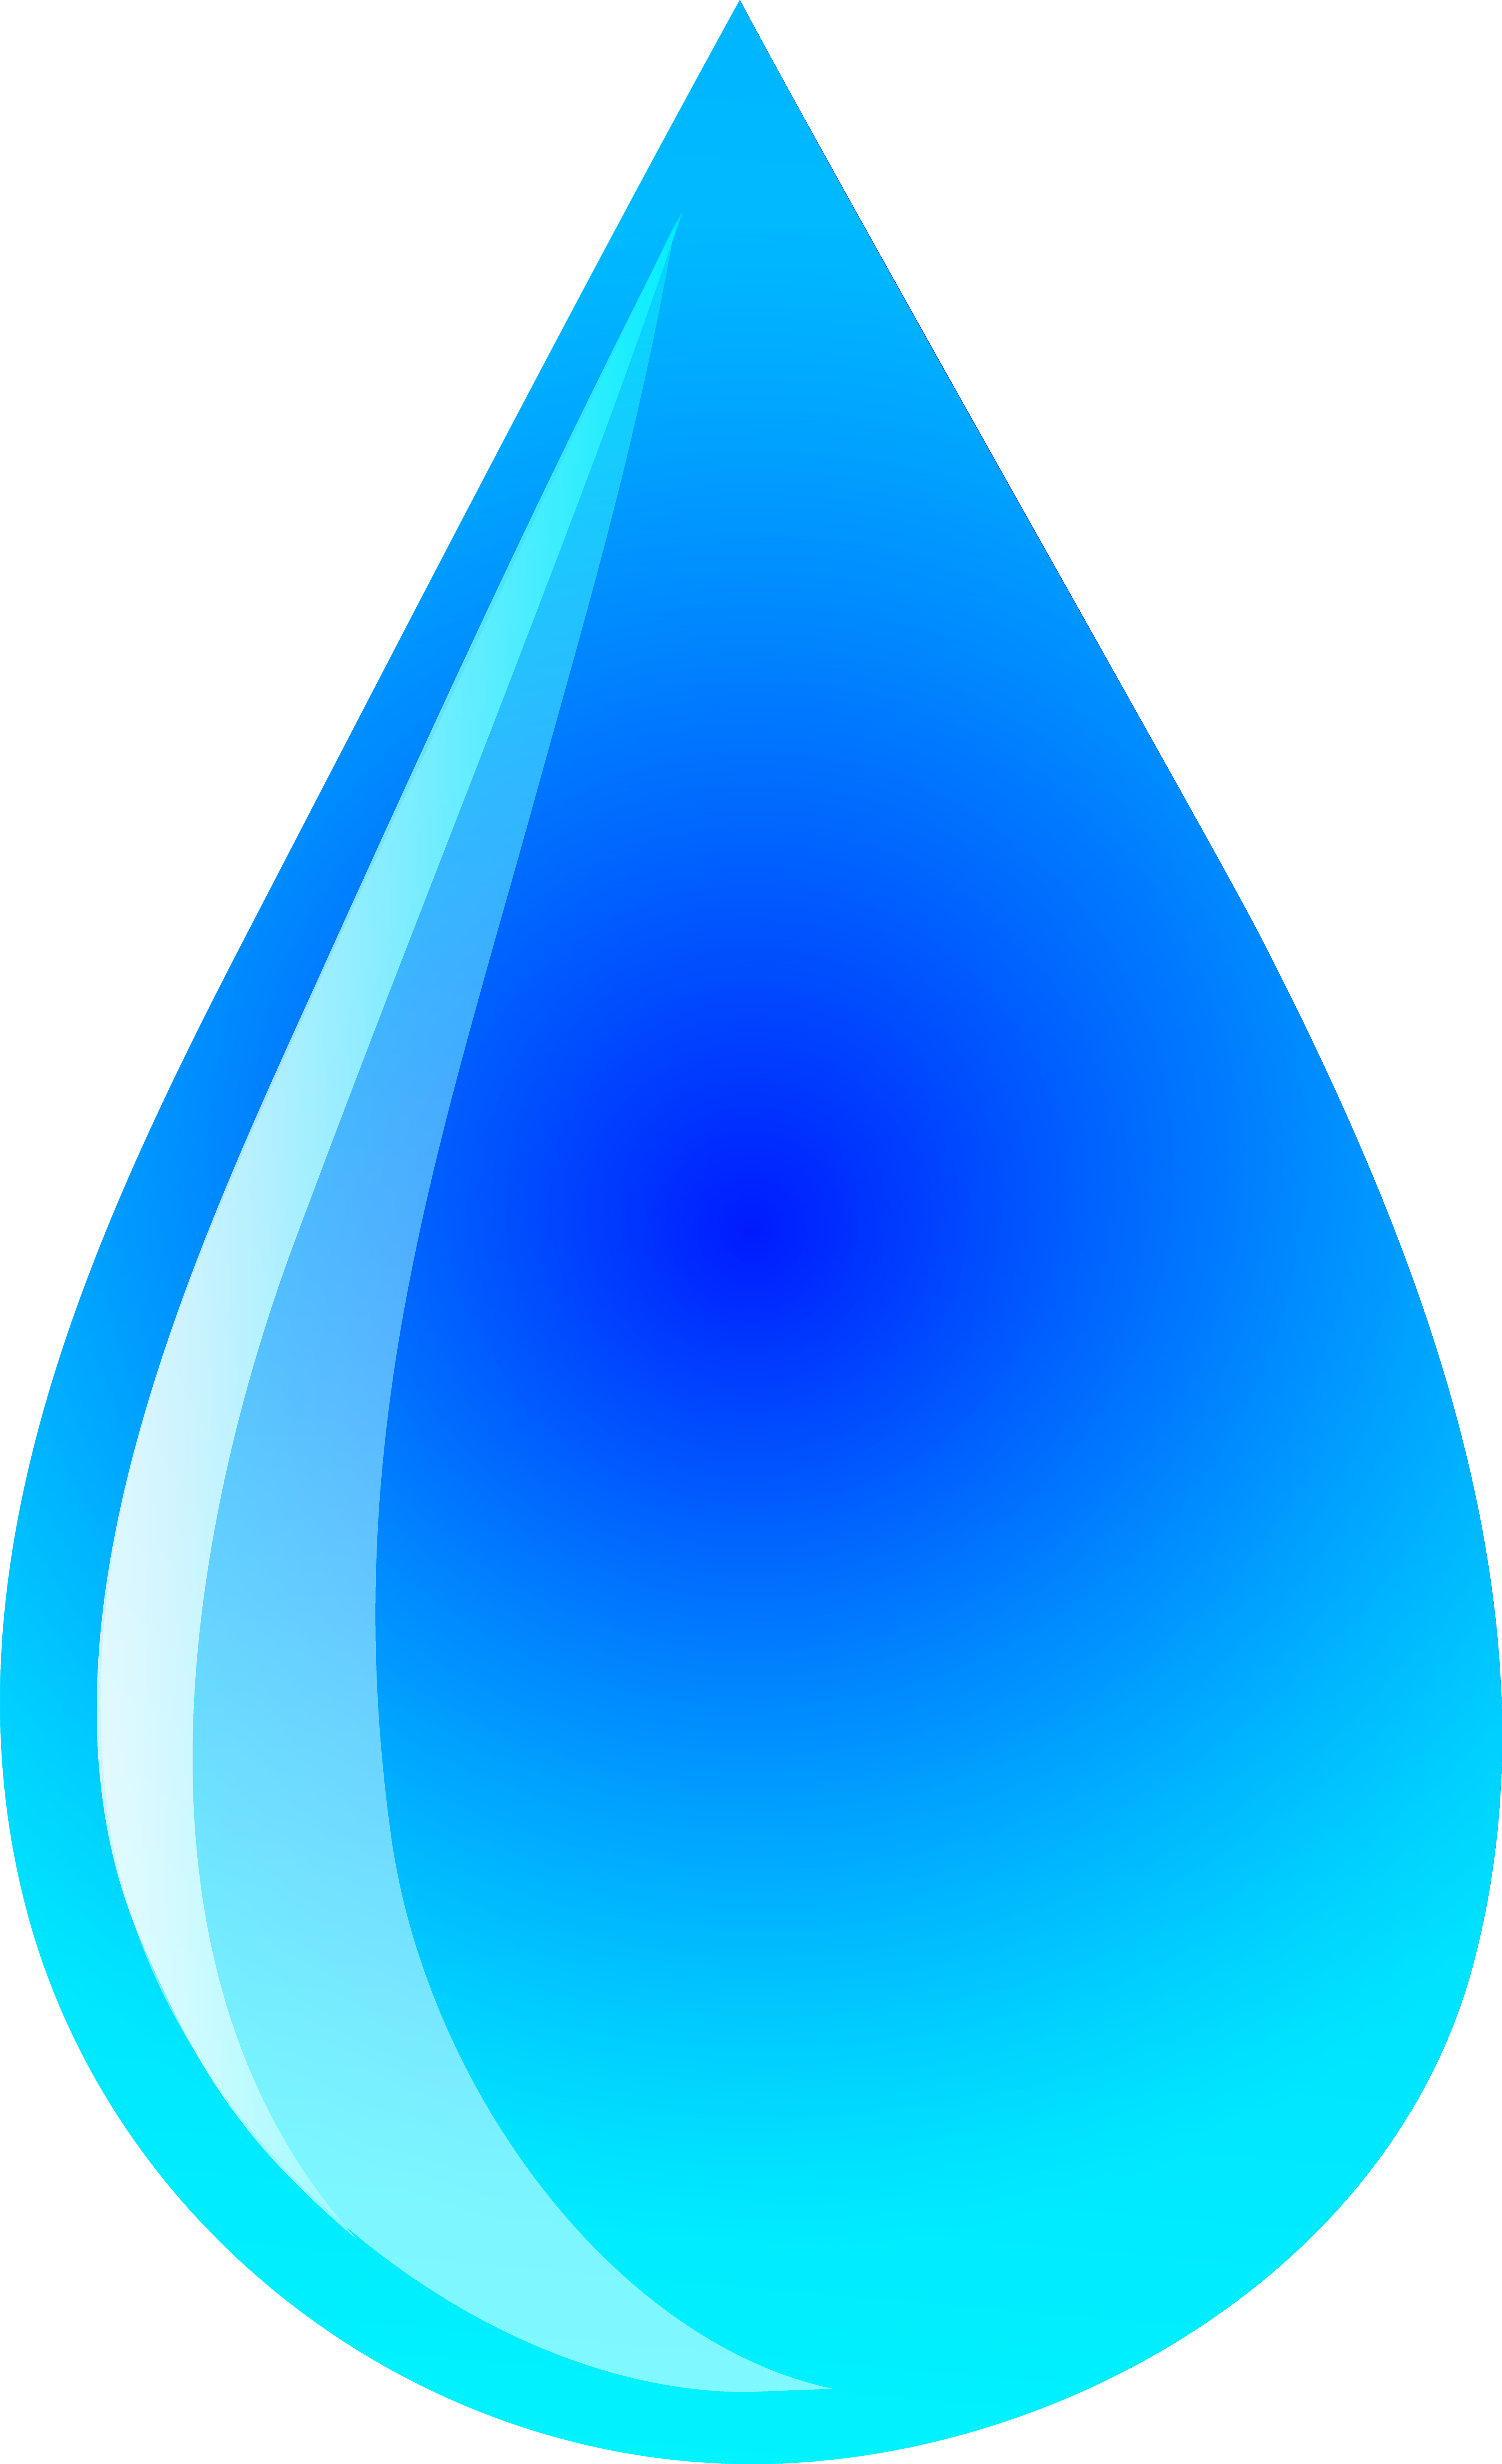 Water drop clipart free